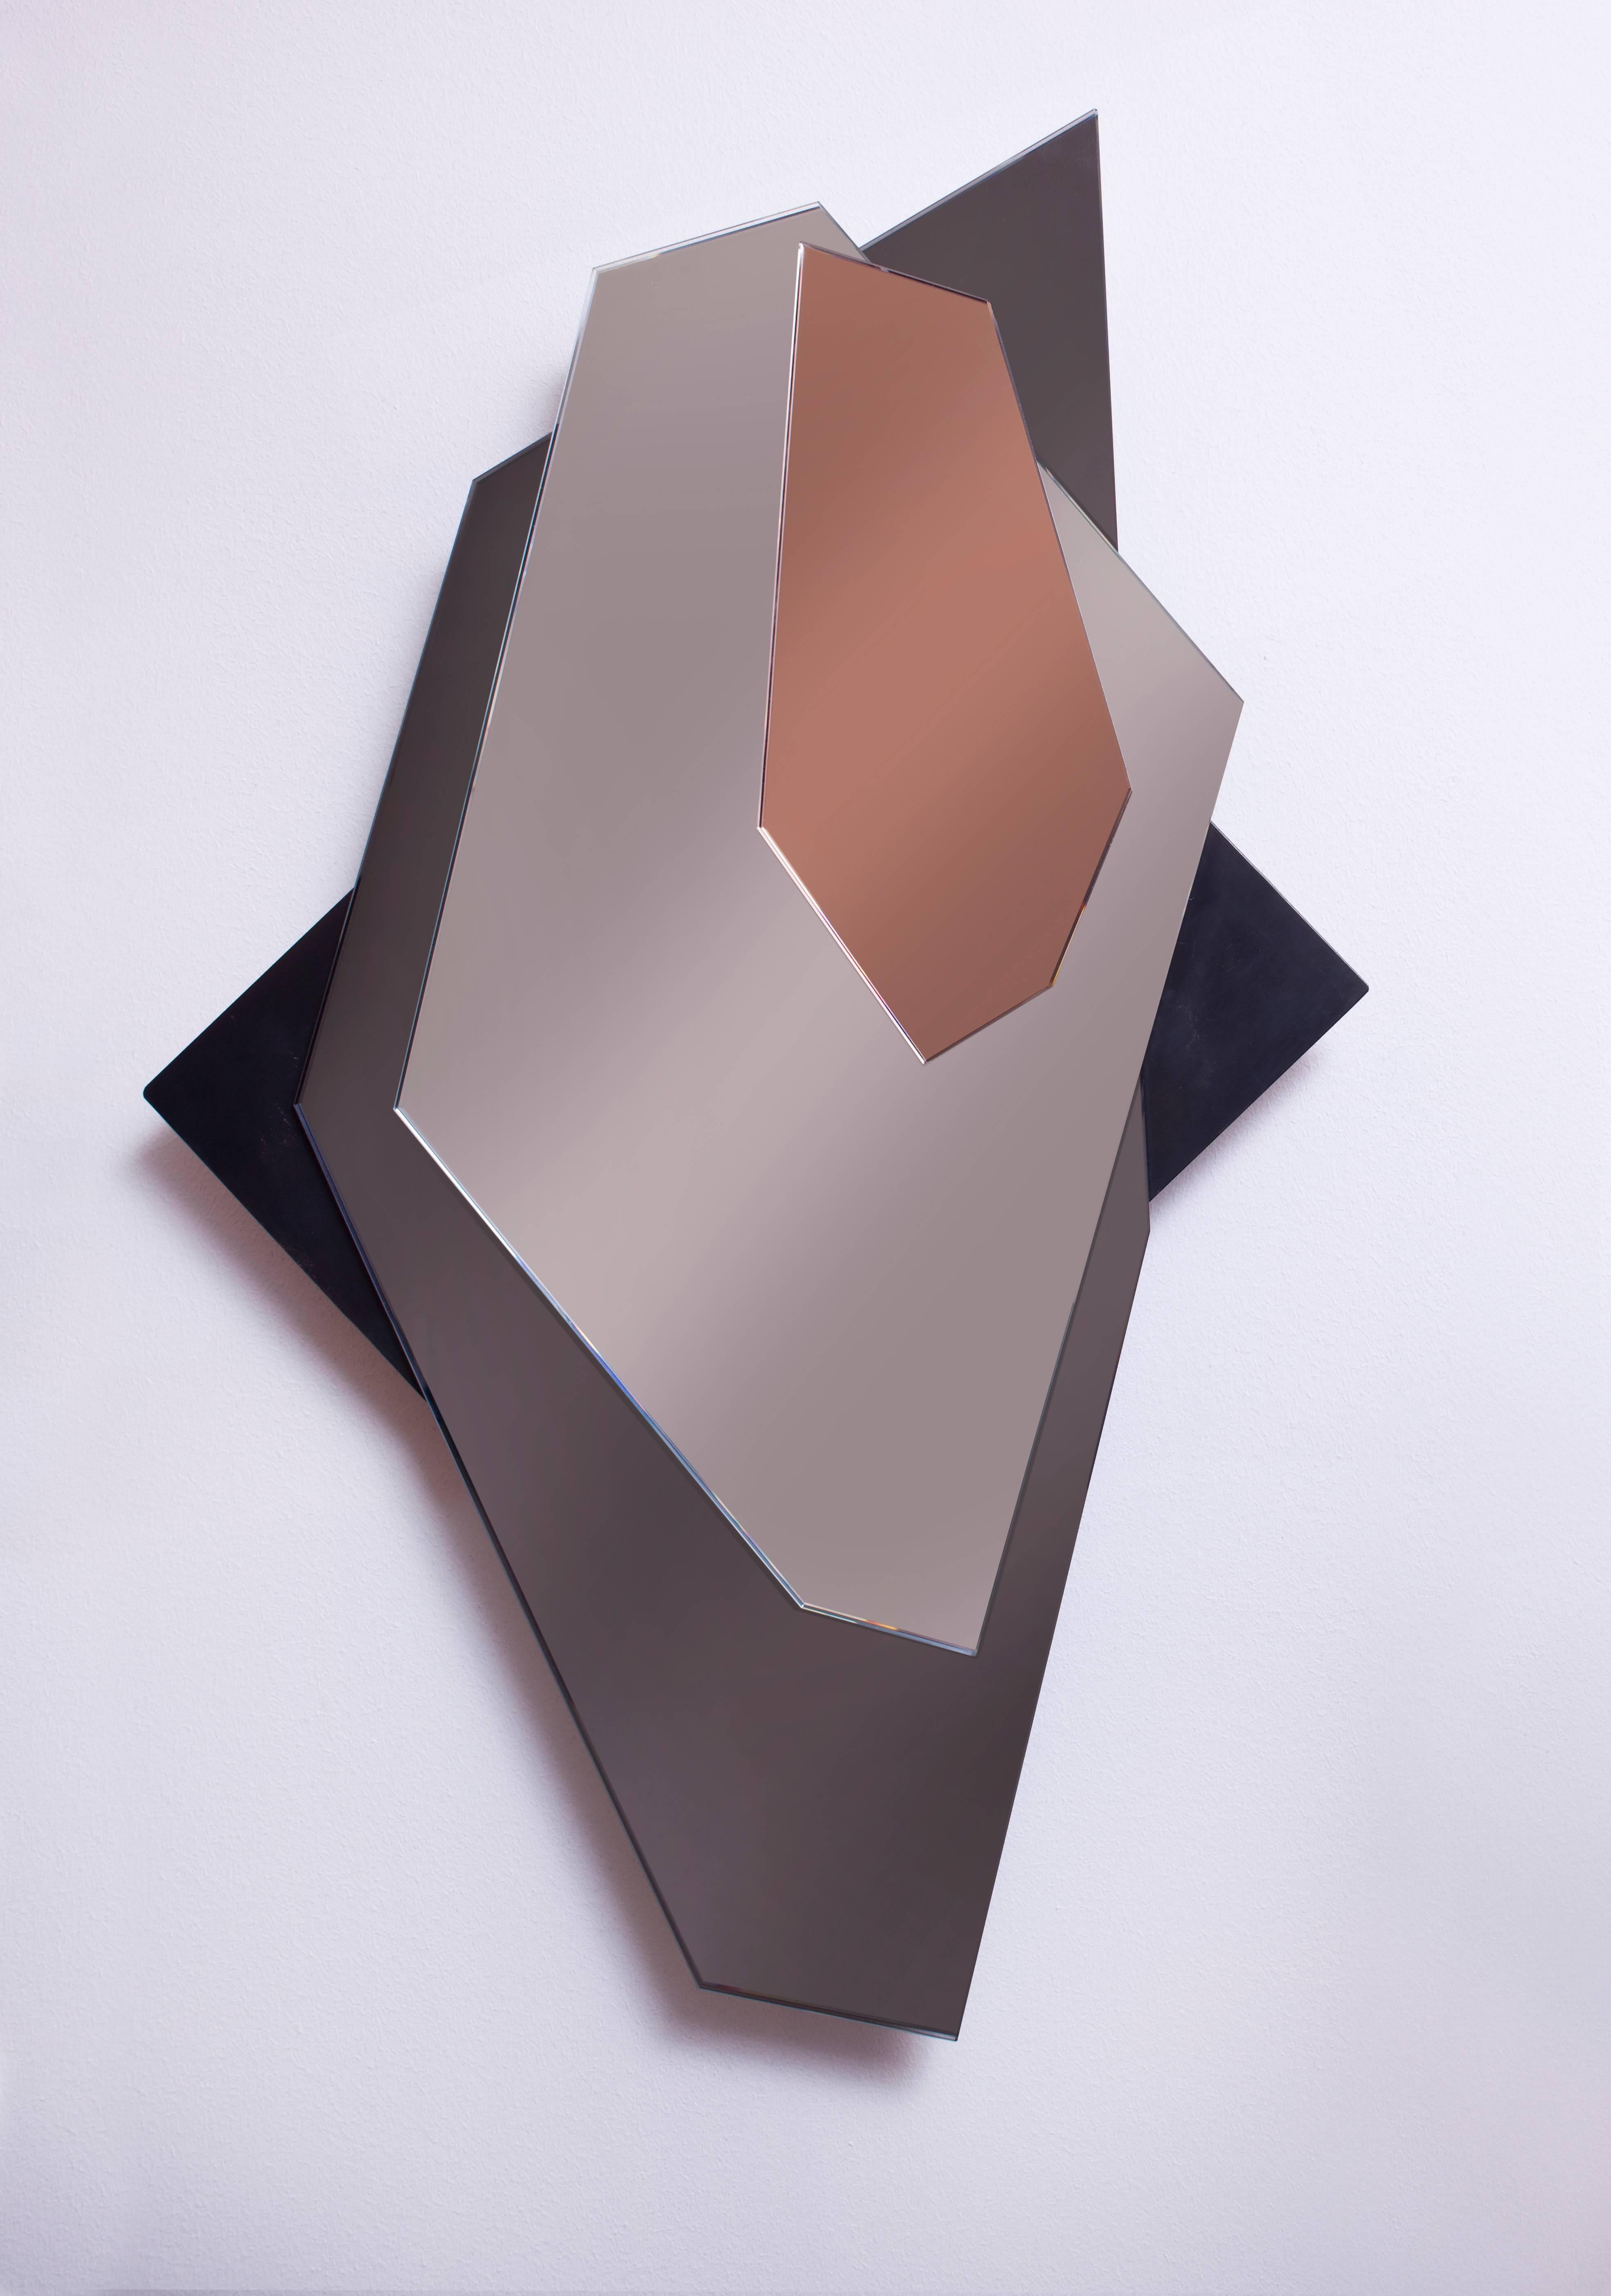 High end mirror by Harry Clark in three different glass mirror colors on a metallic powder-coated base.
The quality of the glass work is outstanding.

